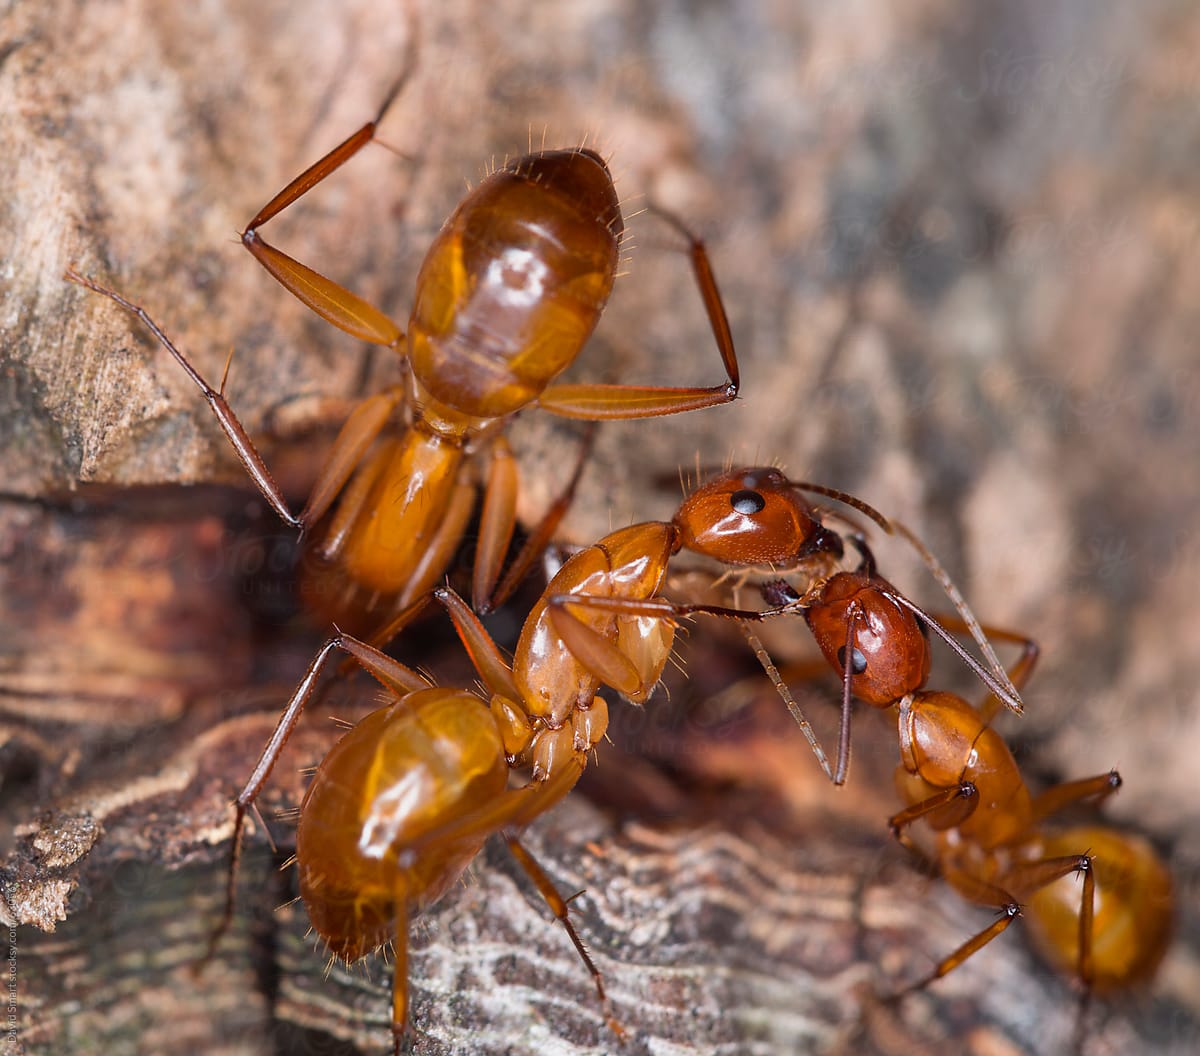 Workers ants engaging in the social sharing of food.